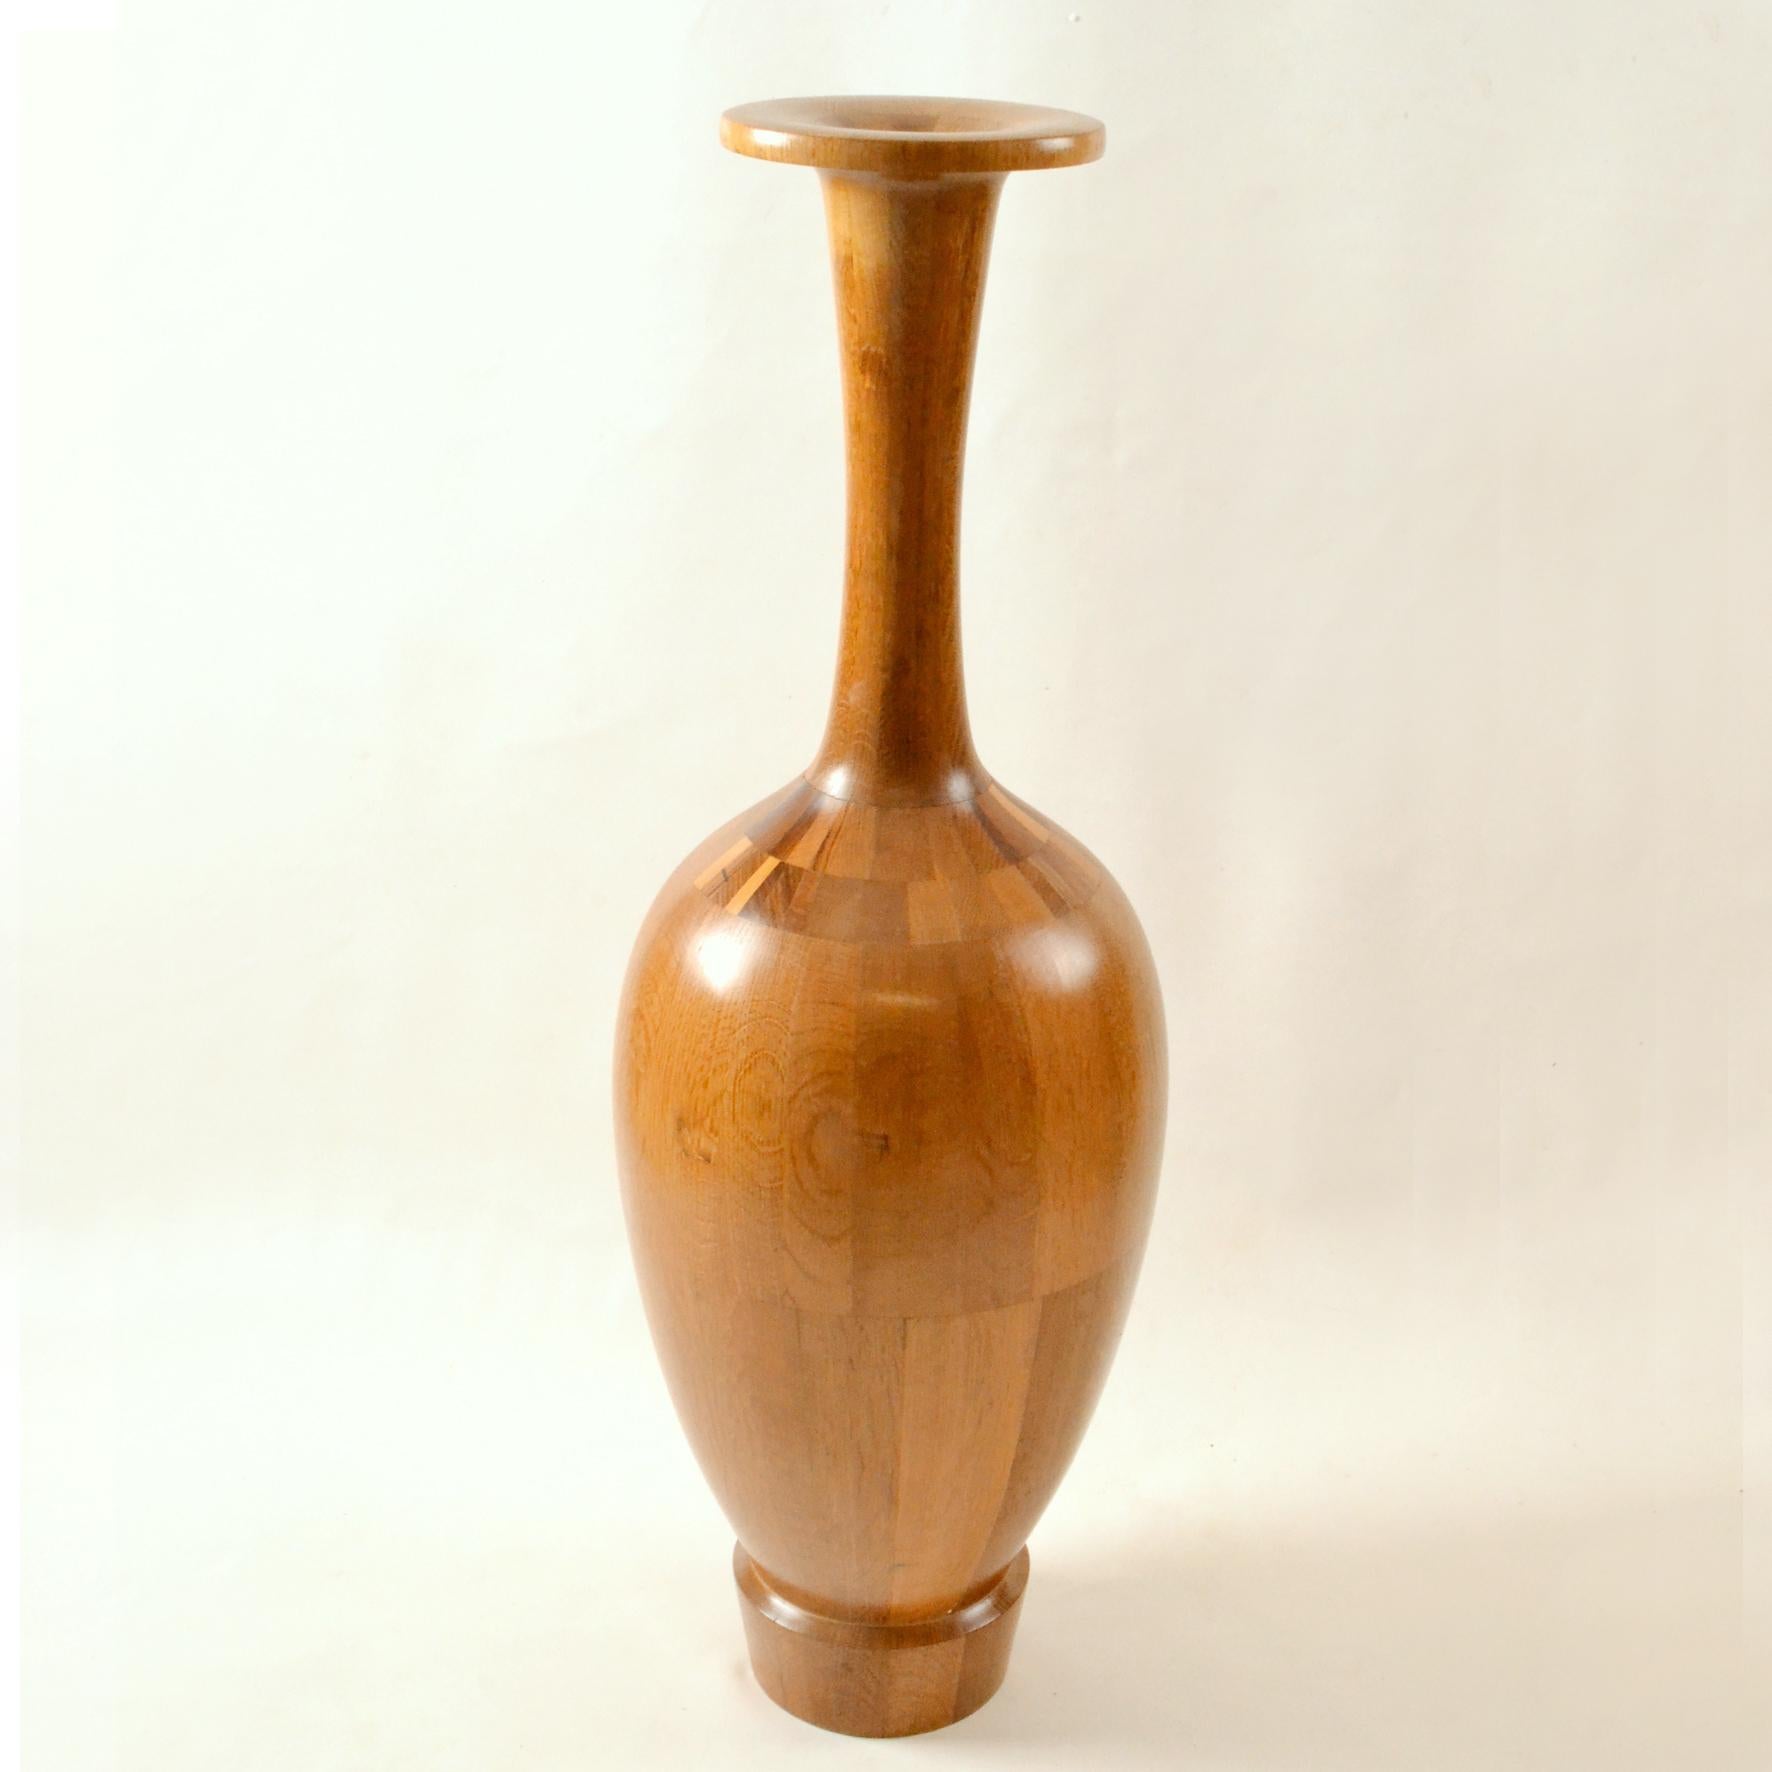 Tall hand turned wooden specimen vase by master craftsman Maurice Bonami (1929), Belgium. Intricately constructed from many different specimens of wood and turned on a lathe, produced between 1965 and 1975.
Commonly mis-attributed to Frere De Coene.